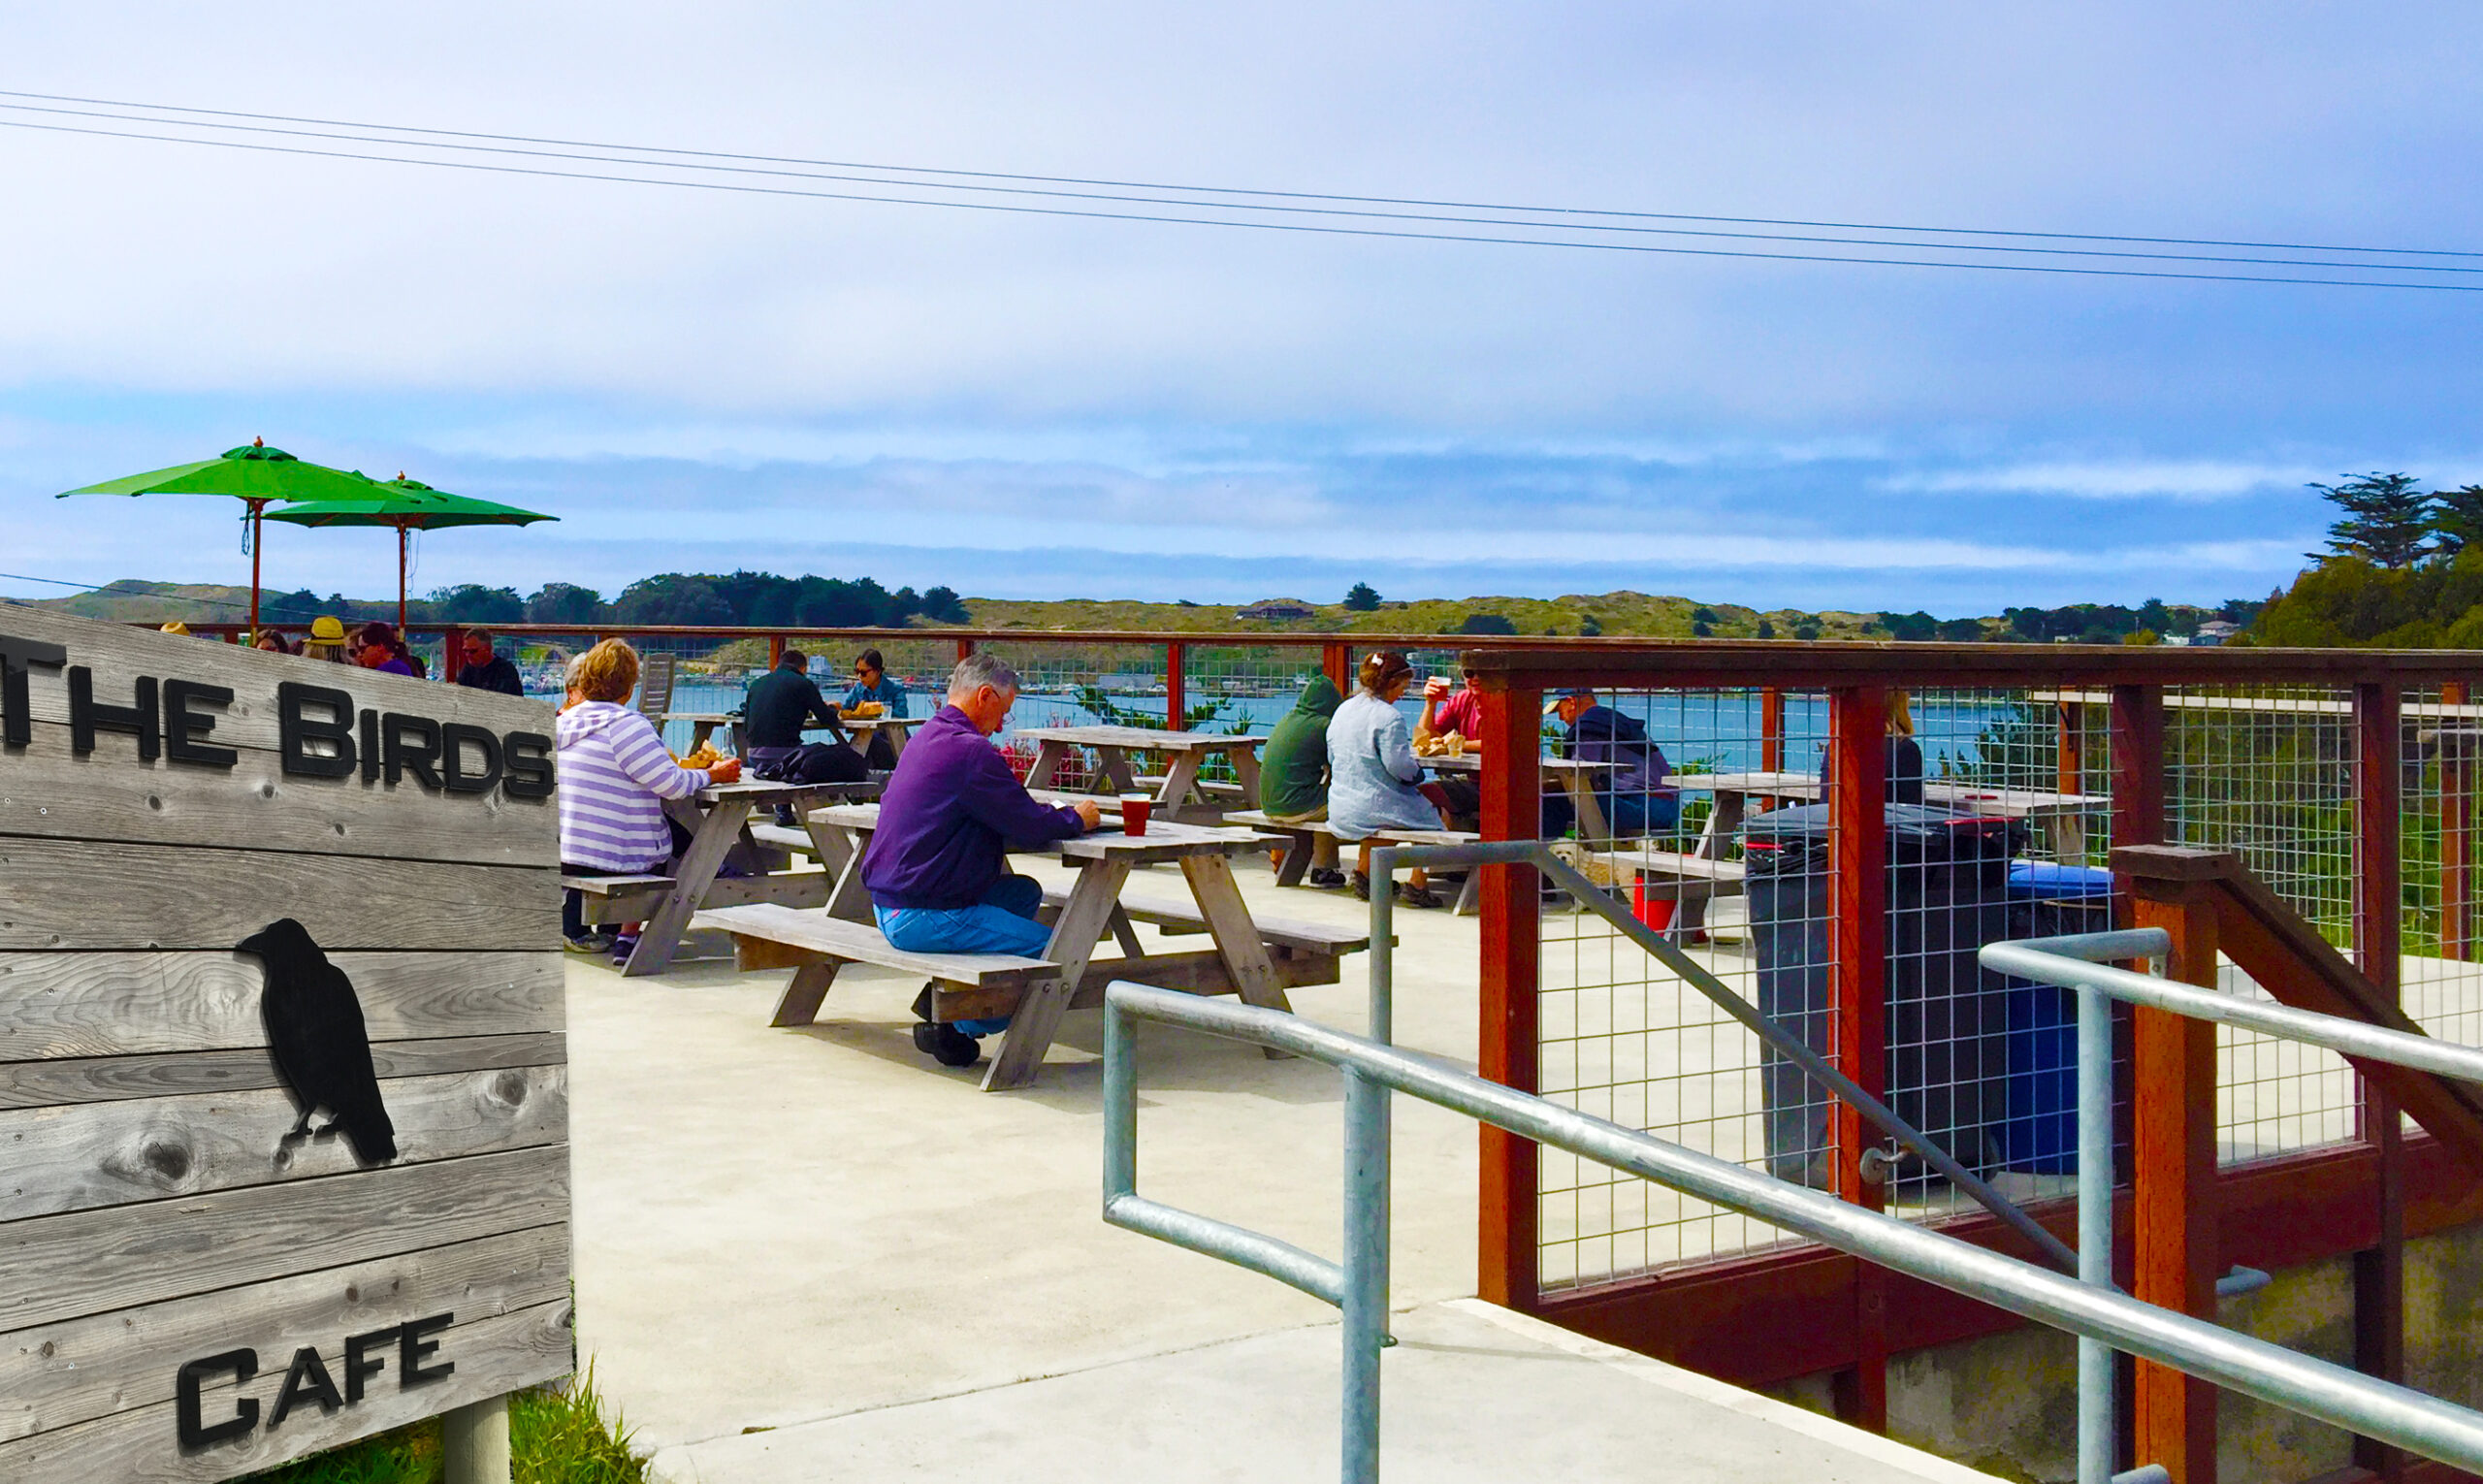 The Birds Cafe in Bodega Bay serves up casual food with a million dollar view